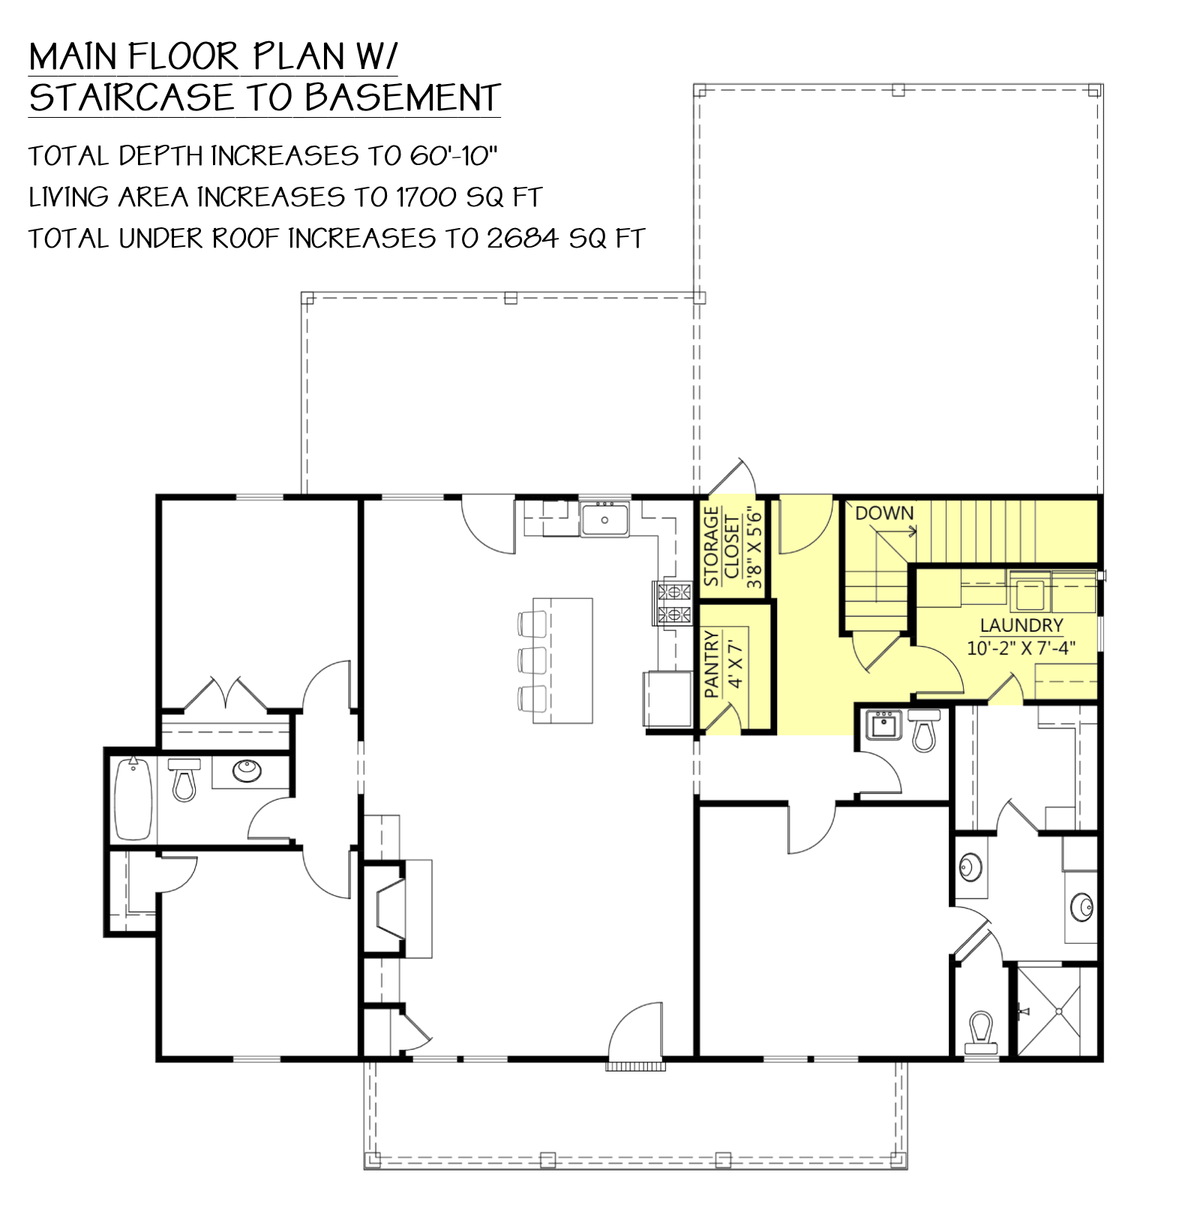 Honey Dew First Floor Plan with Basement Stairs